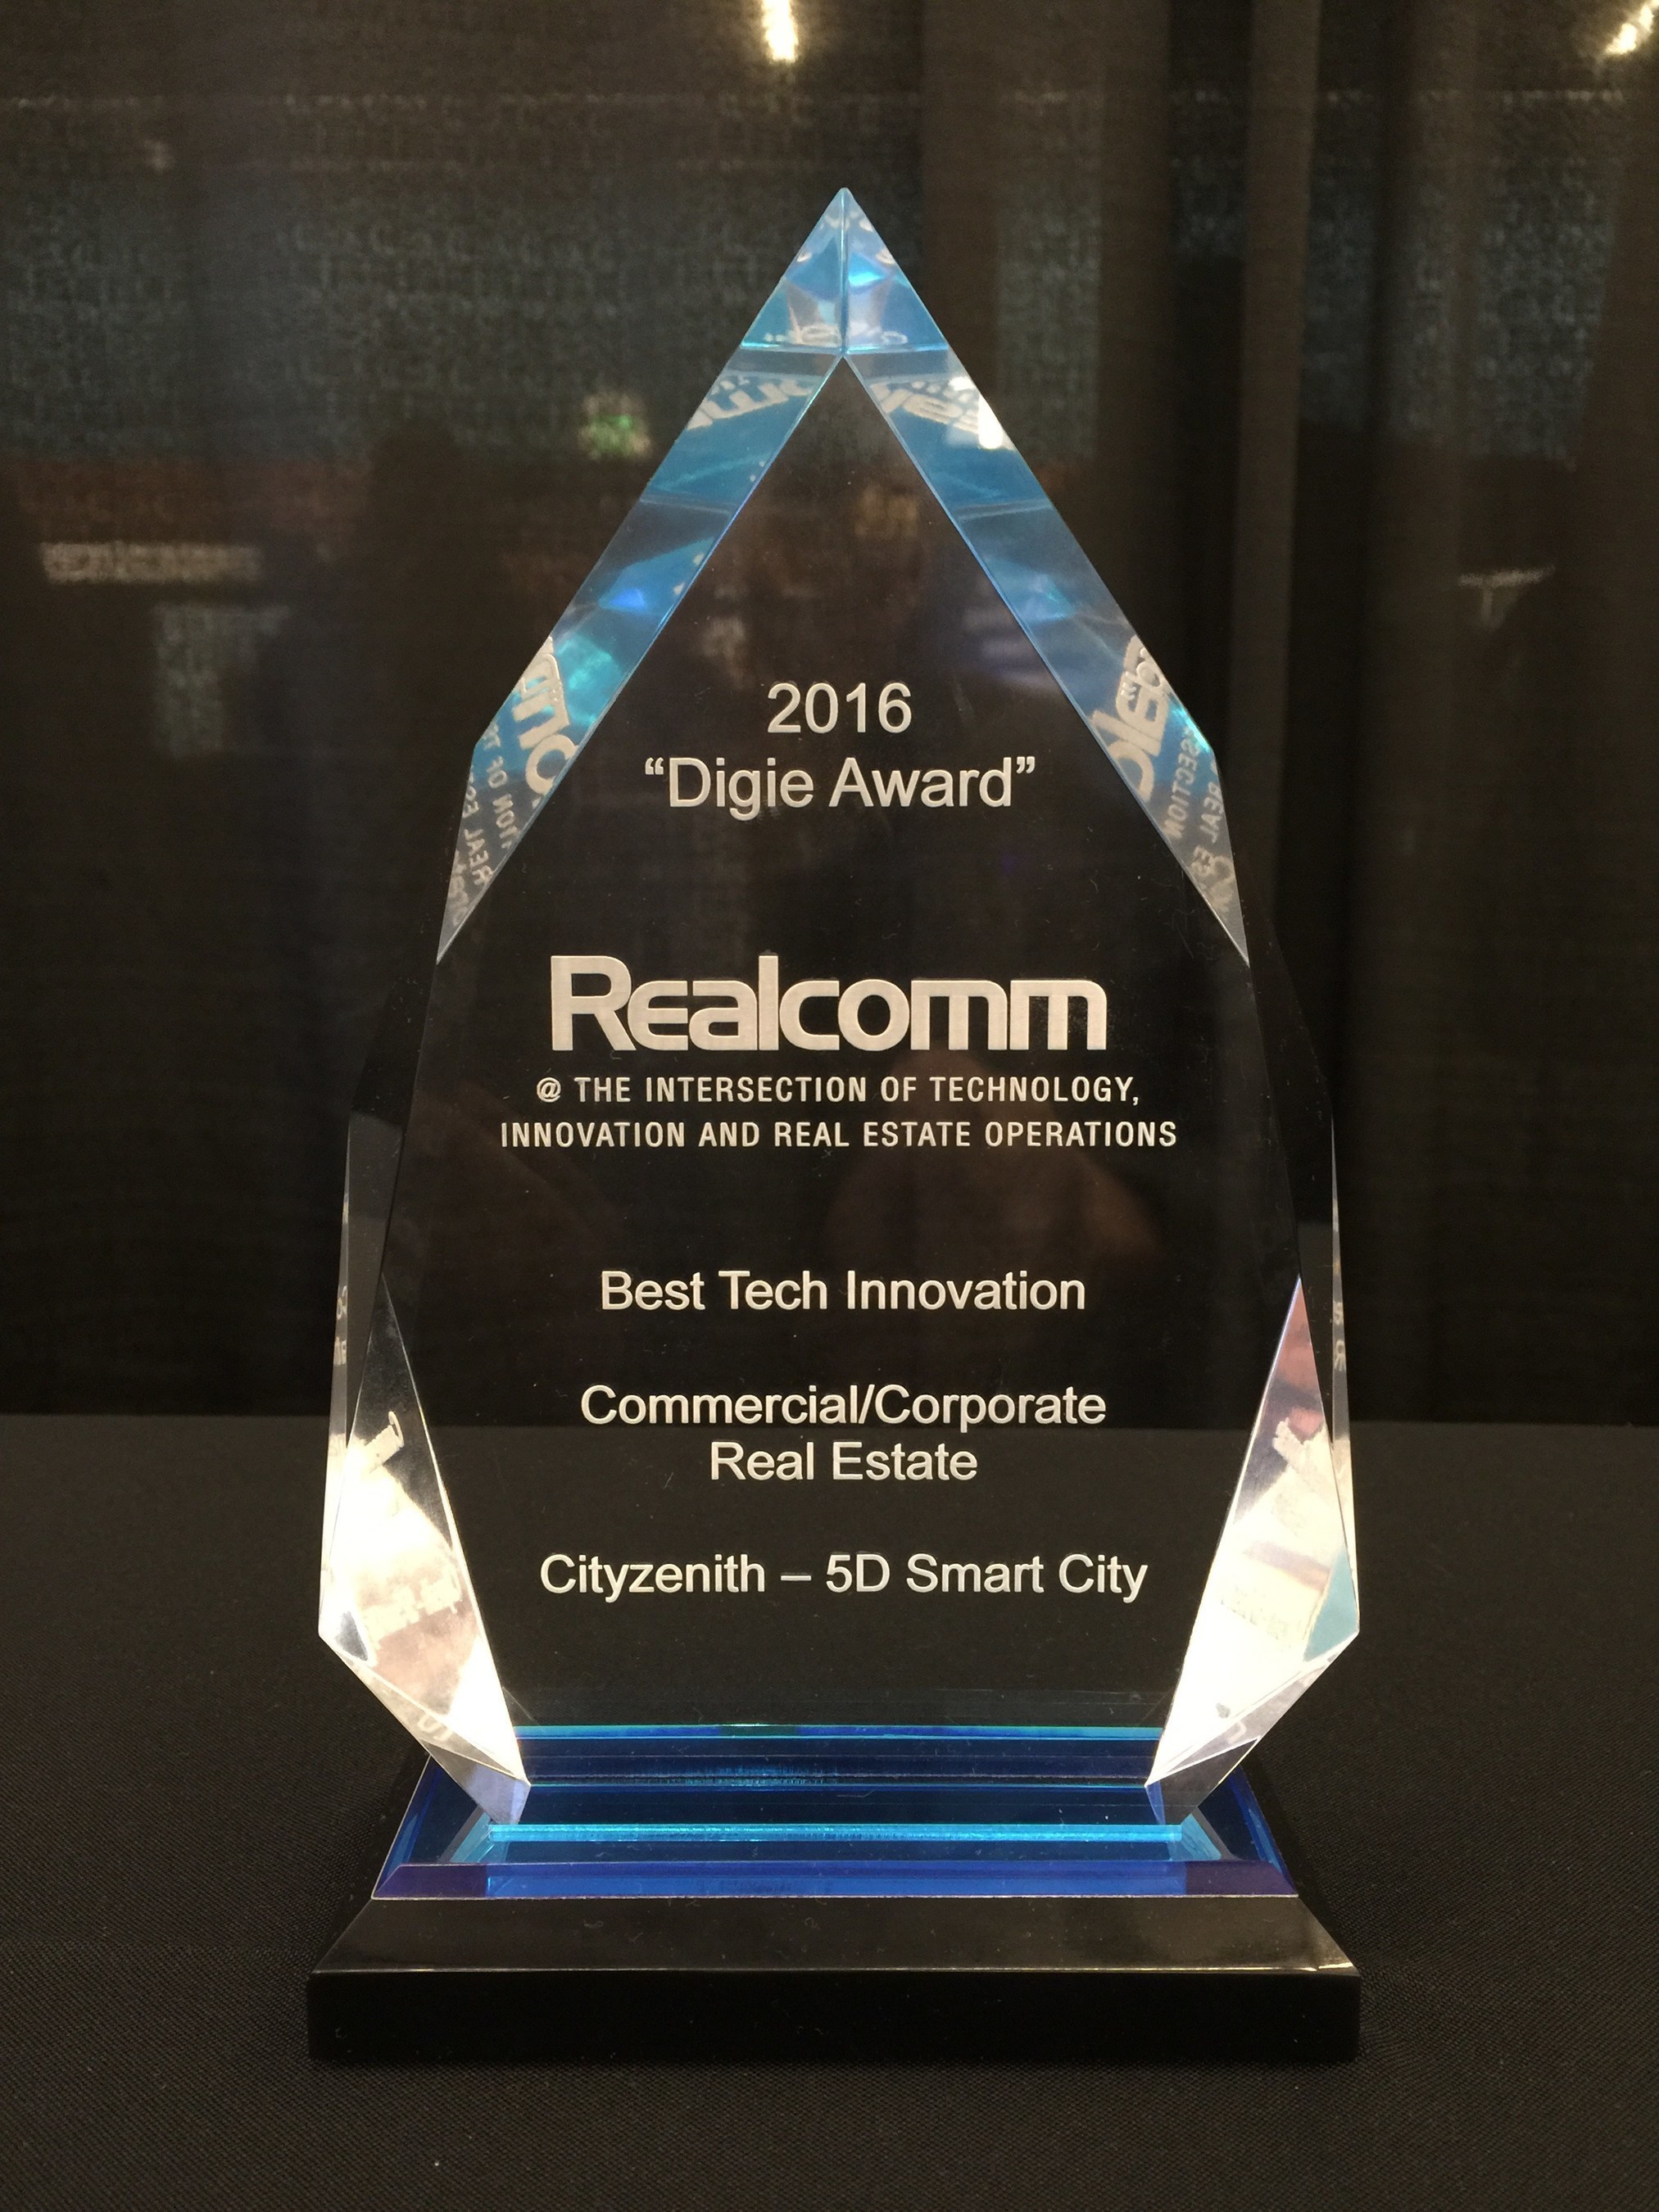 Cityzenith's Digie Award for Best Tech Innovation in Commercial and Corporate Real Estate. For a full list of Digie Award winners, visit: http://www.realcomm.com/realcomm-2016/digies-winners.asp .